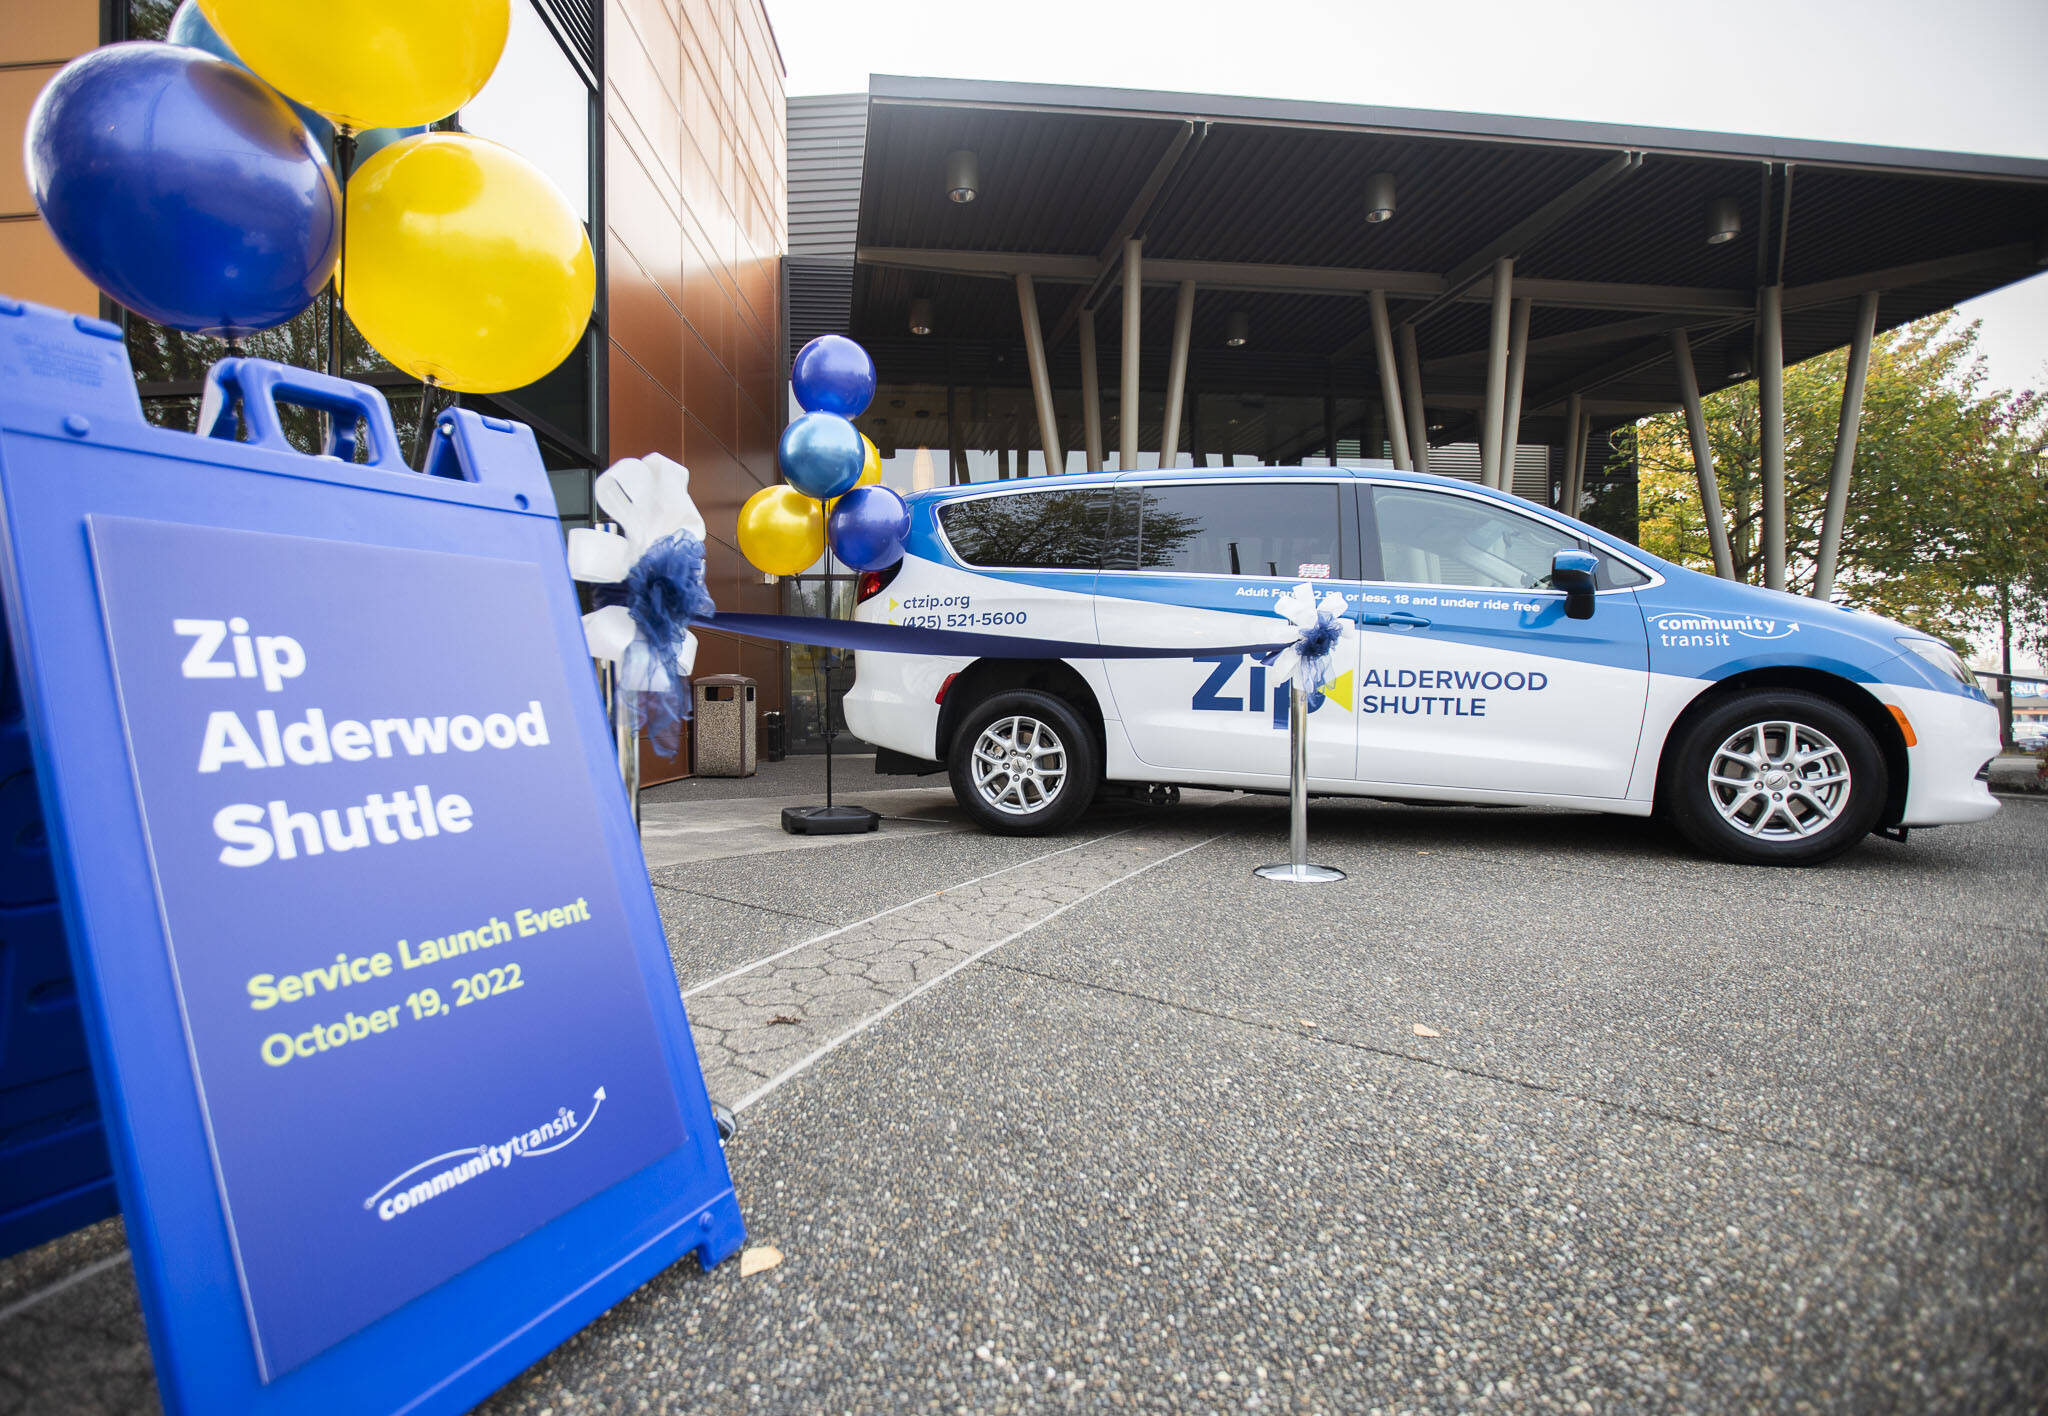 Riders can hail a sedan or a van, as seen here Wednesday at the Lynnwood Convention Center, through the new Community Transit Zip Alderwood shuttle service. One of the vans is wheelchair accessible. (Olivia Vanni / The Herald)